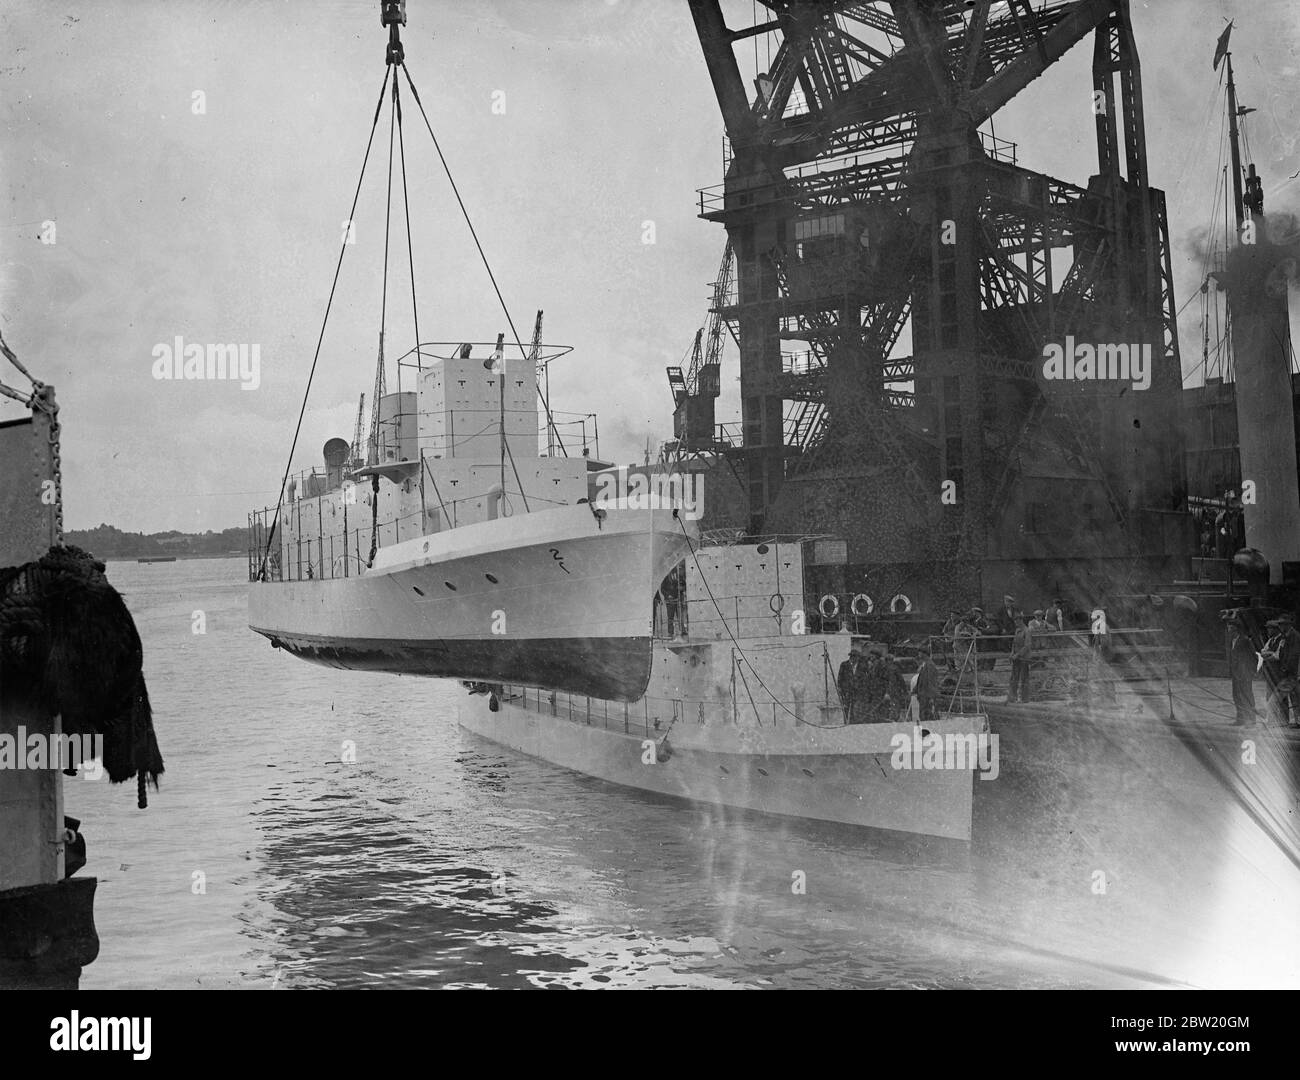 Three patrol launches, weighing 65 t each, where loaded on the Armiston at Southampton for Baara. They have been ordered by the Irak [Iraq] Government and would be used for patrol duties. 1 July 1937 Stock Photo